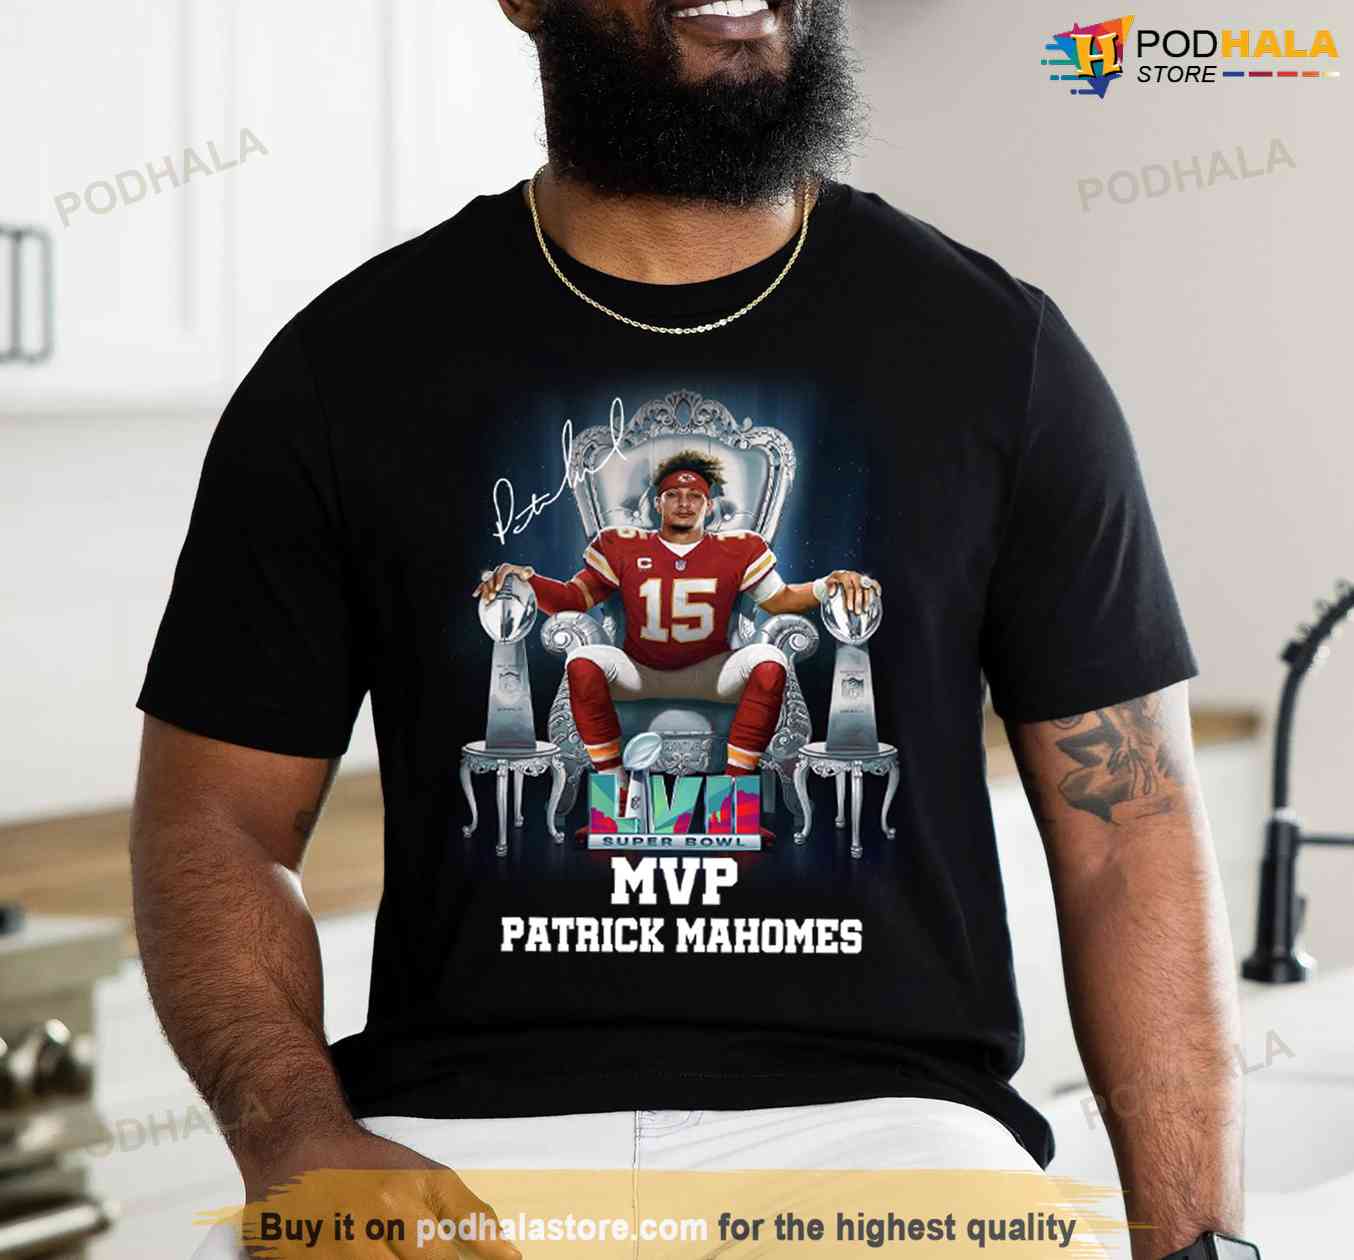 patrick mahomes jersey in store